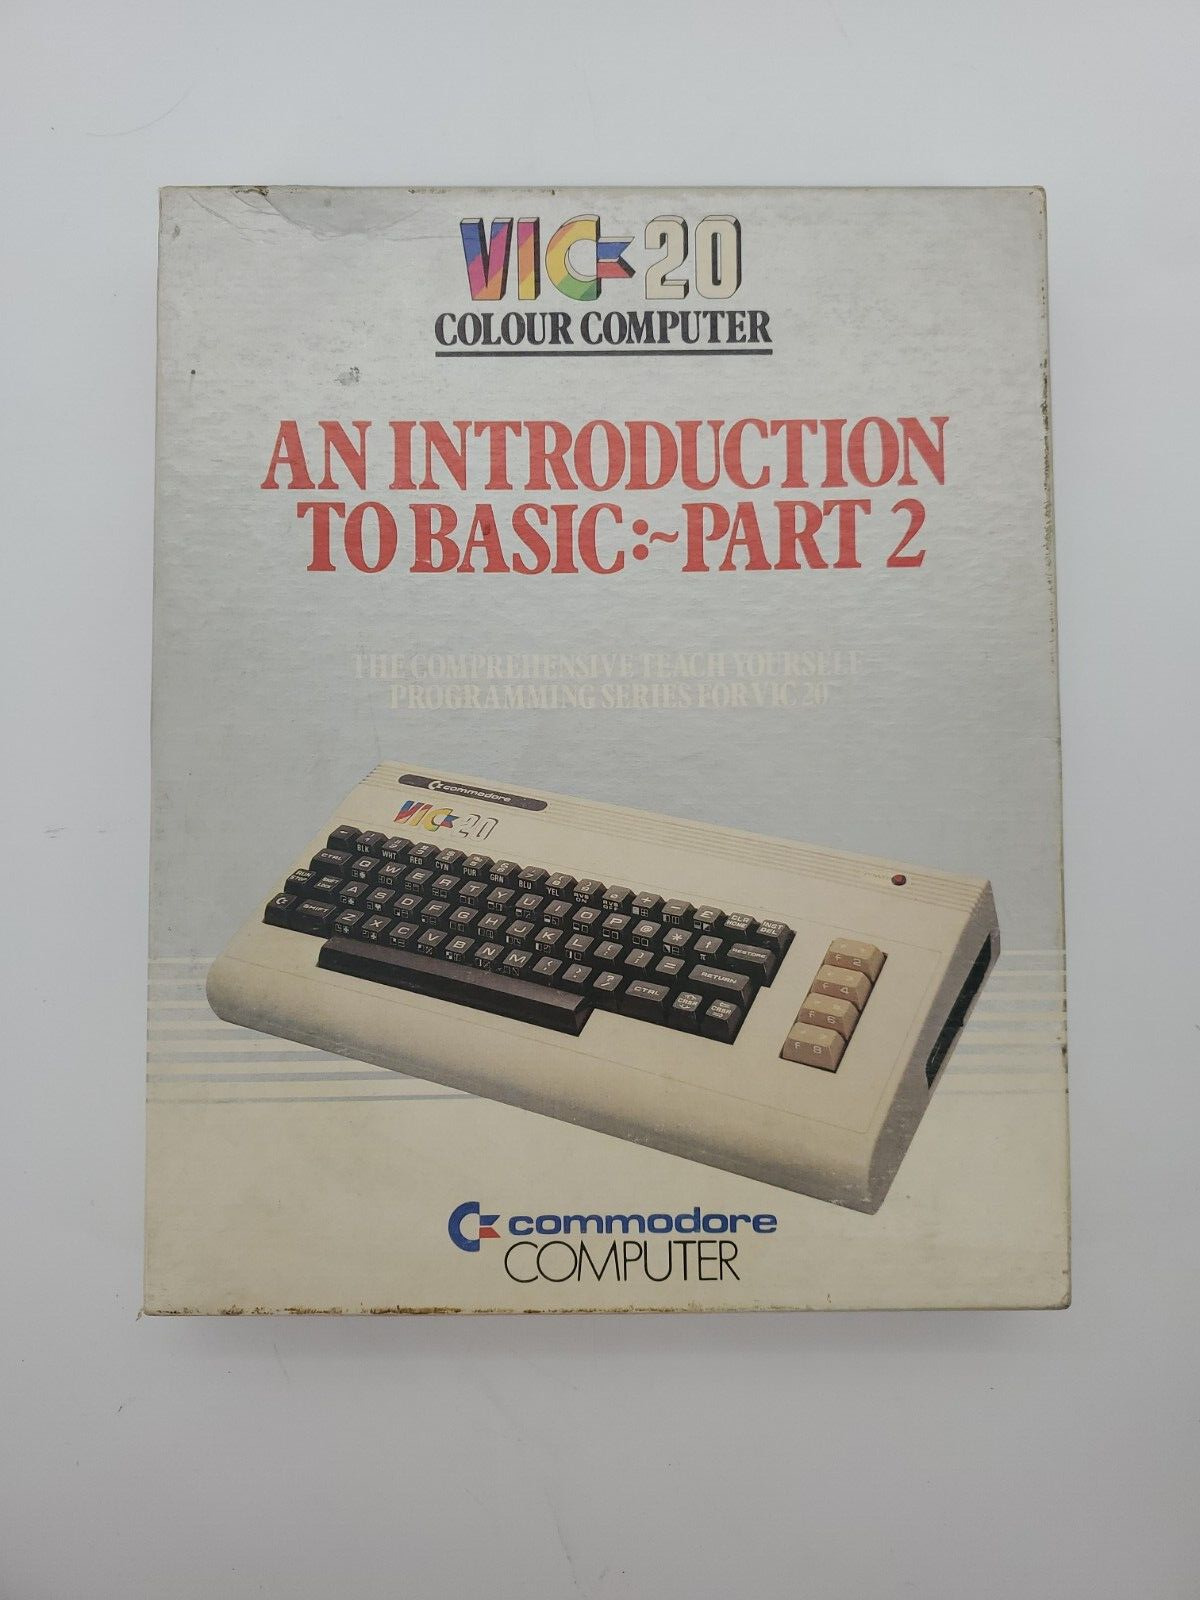 VIC-20 An Introduction to Basic:Part 2 manual and software Cassettes with box